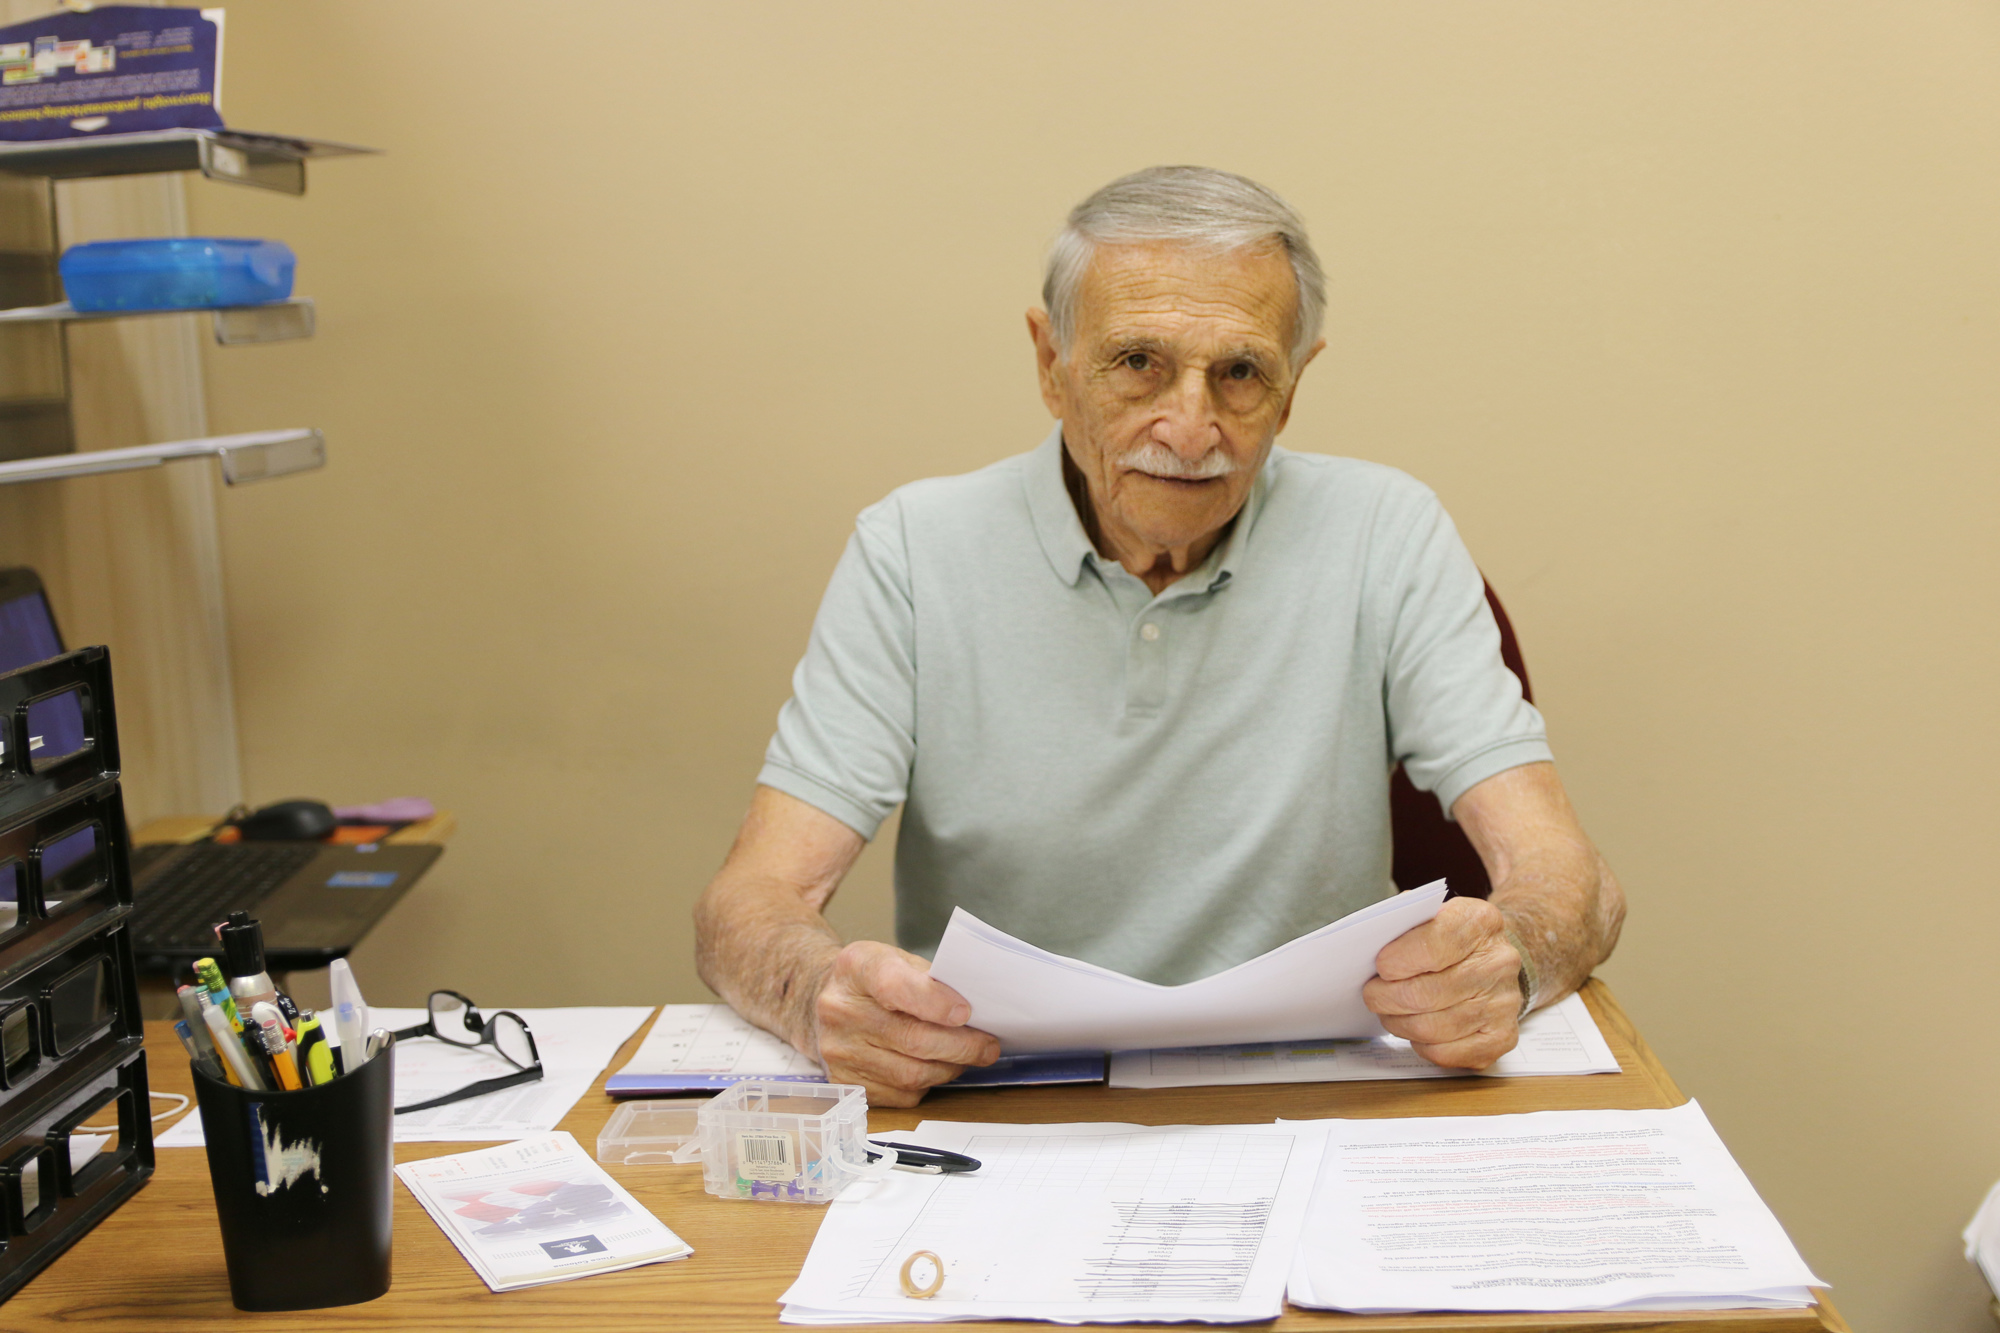 Vince Colonna coordinates much of the volunteering work for the food pantry. Photo by Jarleene Almenas